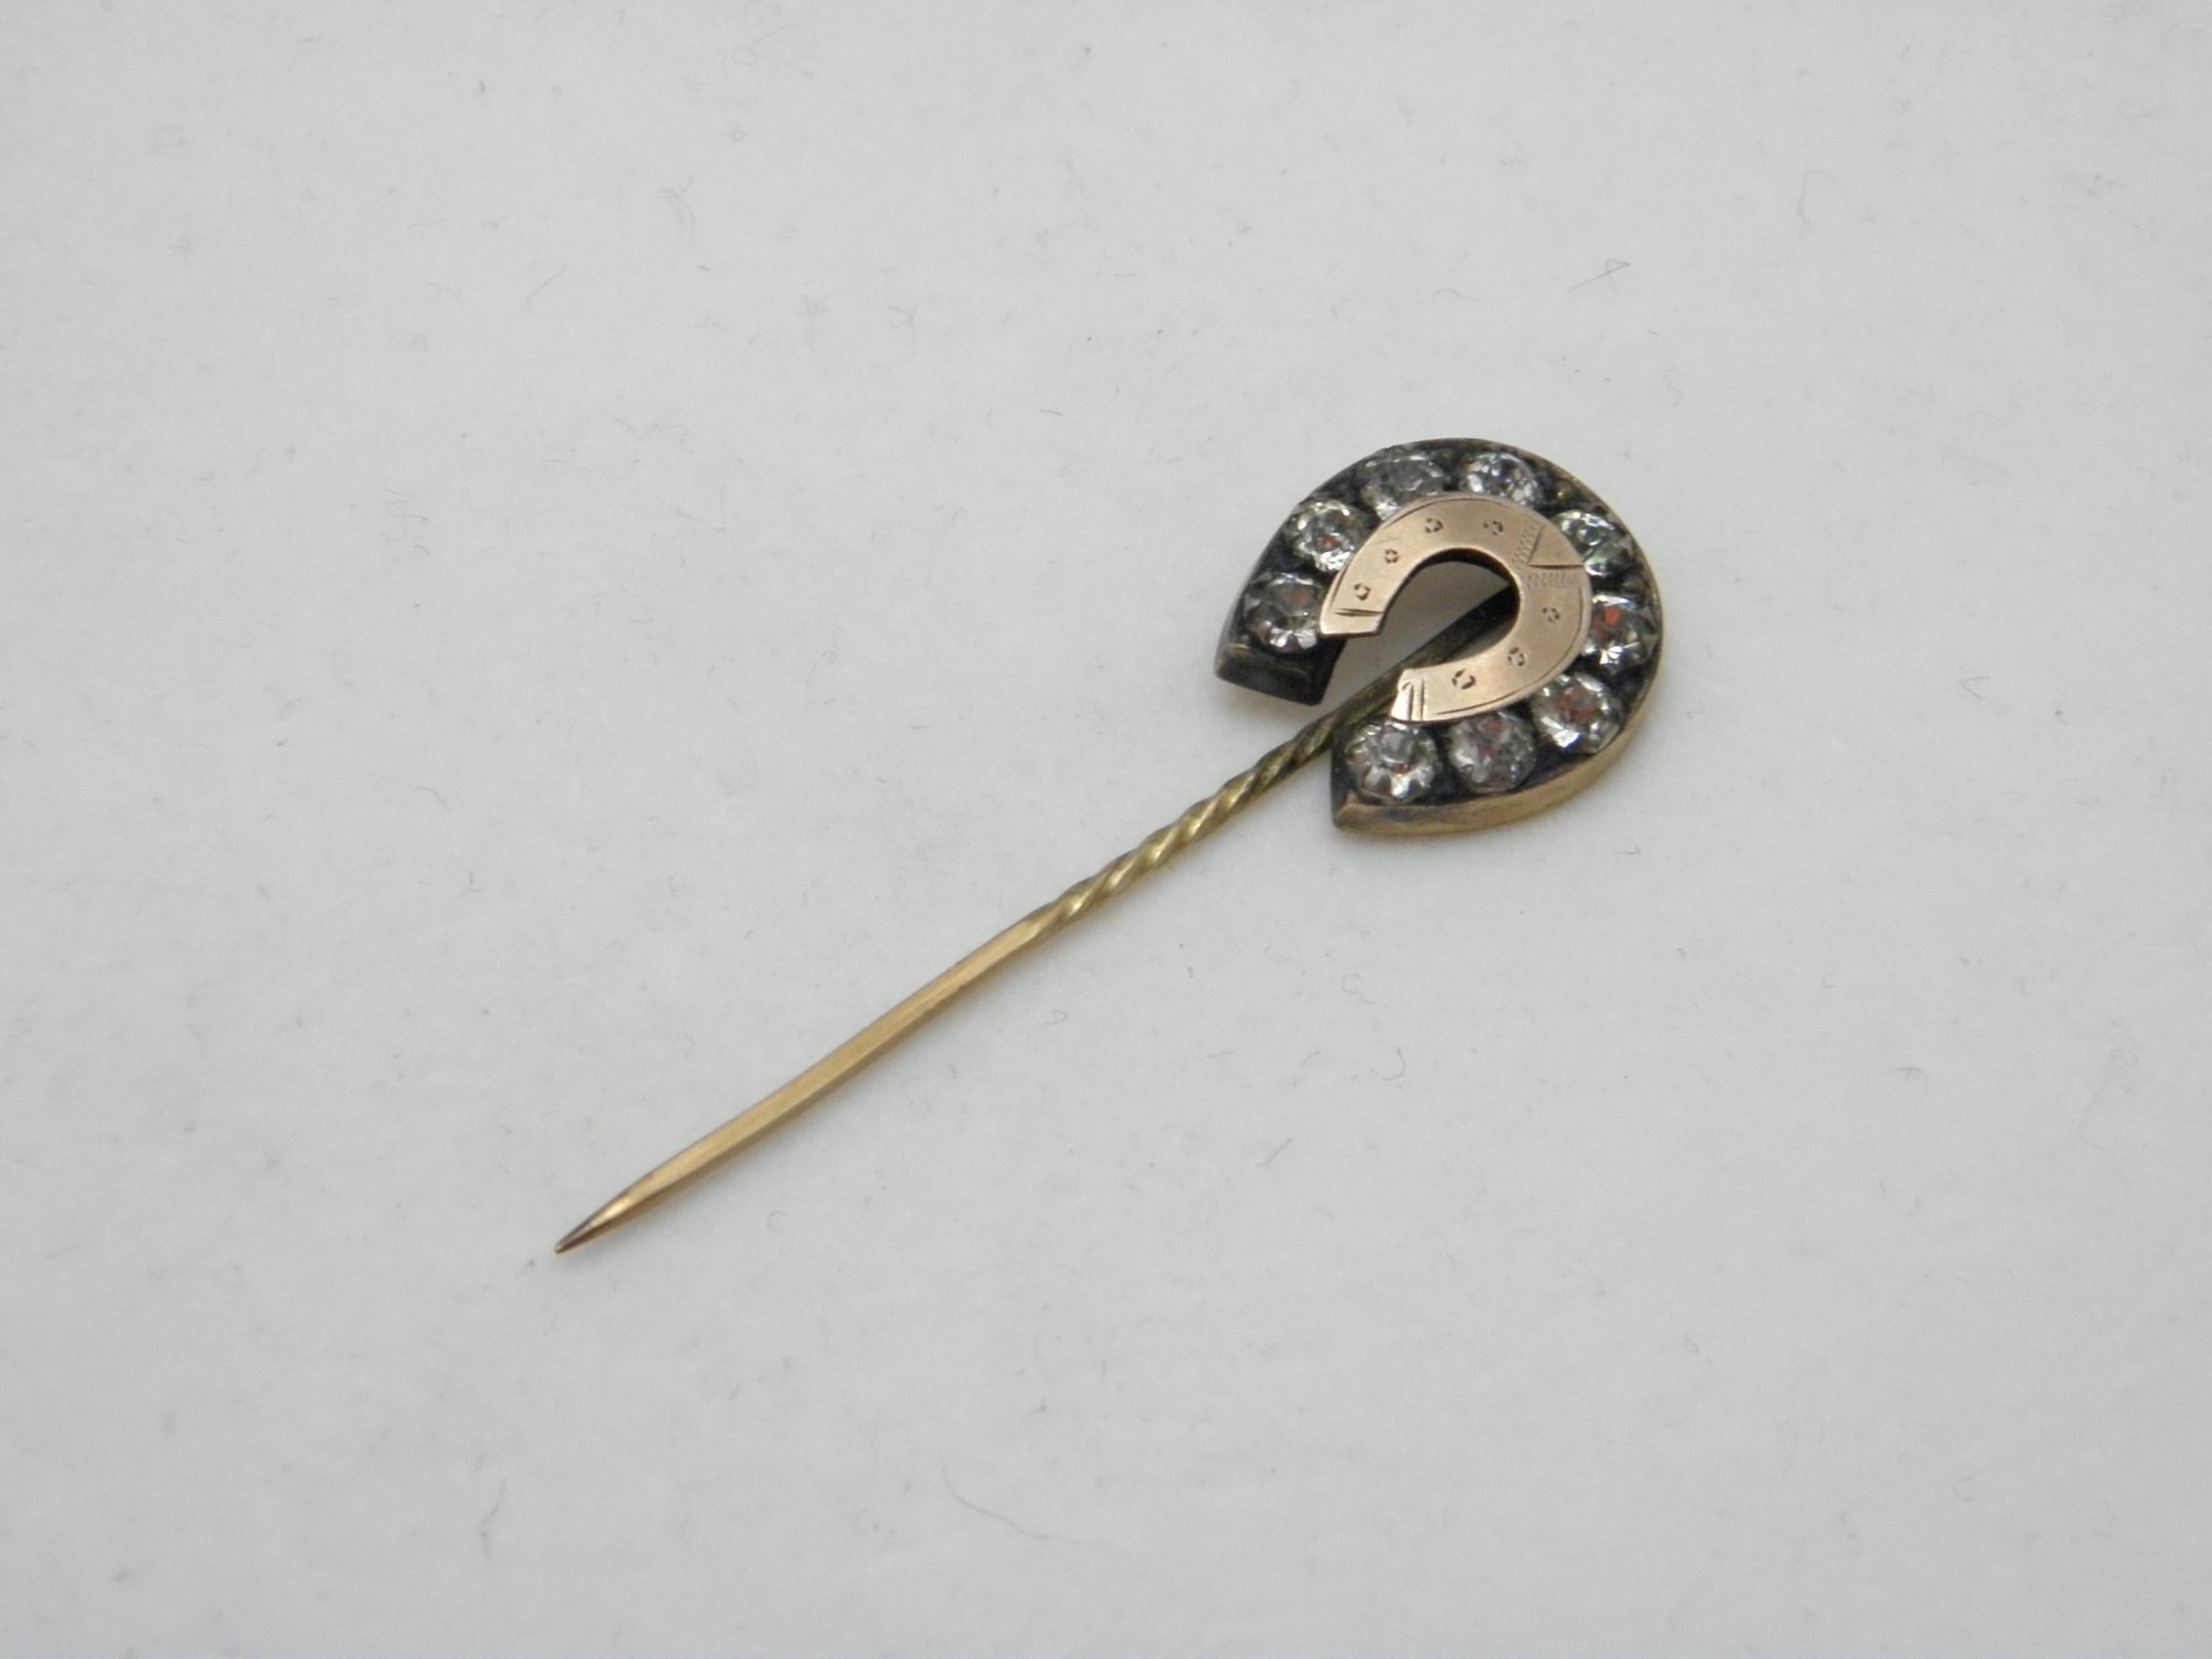 If you have landed on this page then you have an eye for beauty.

On offer is this gorgeous

15CT HEAVY ROSE GOLD HORSESHOE STOCK PIN BROOCH

DETAILS
Material: 15ct (625/000) Solid Heavy Rose Gold
Style: Victorian classic pin in the stock style with